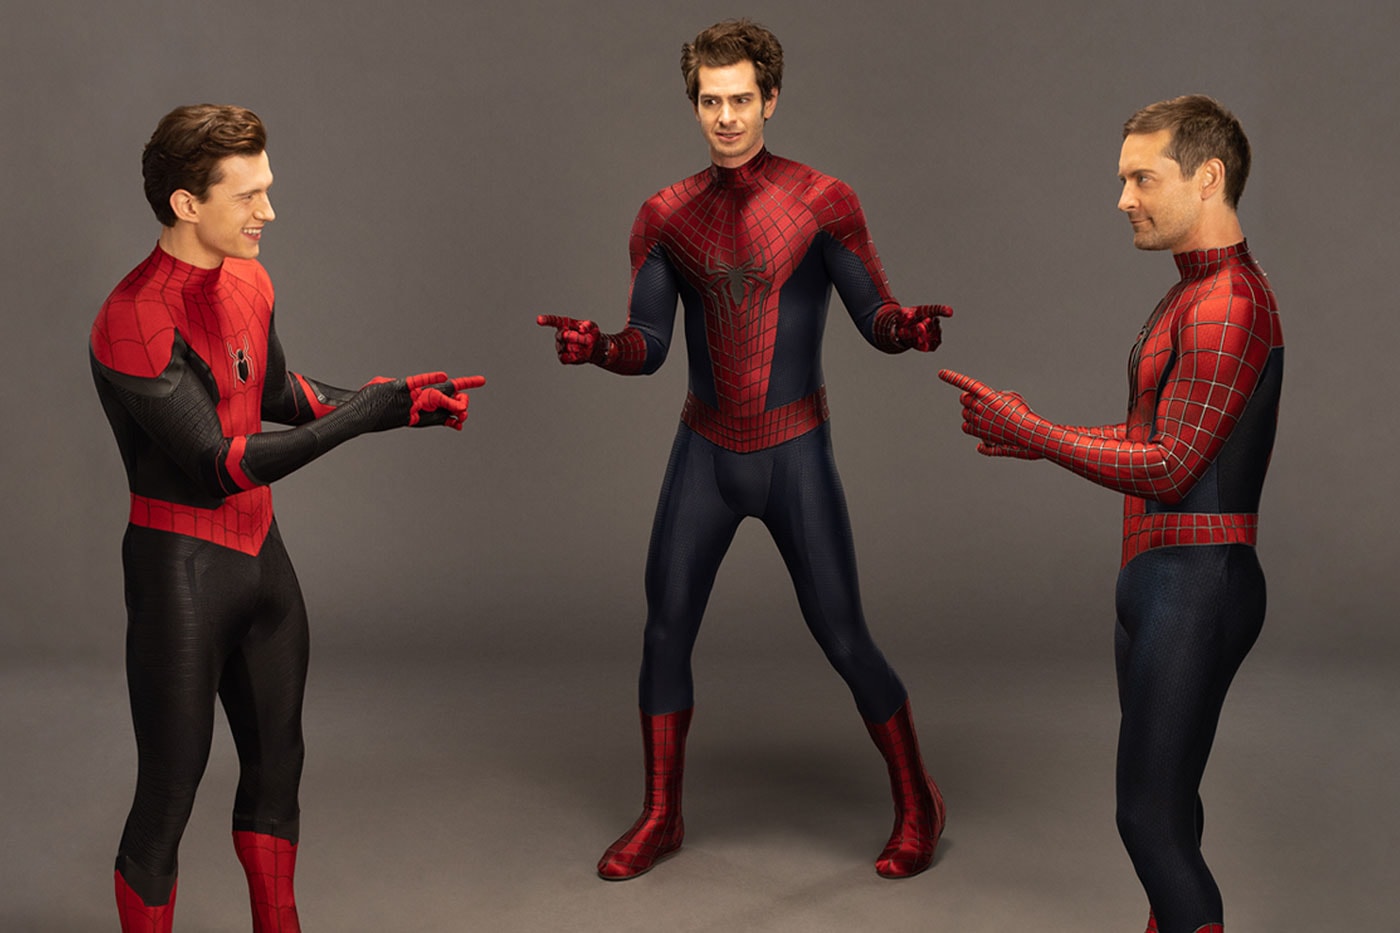 Tom Holland Tobey Maguire Andrew Garfield Recreate Spider-Man Finger Pointing Meme mcu marvel cinematic universe news of digital release dates spider-man: no way home